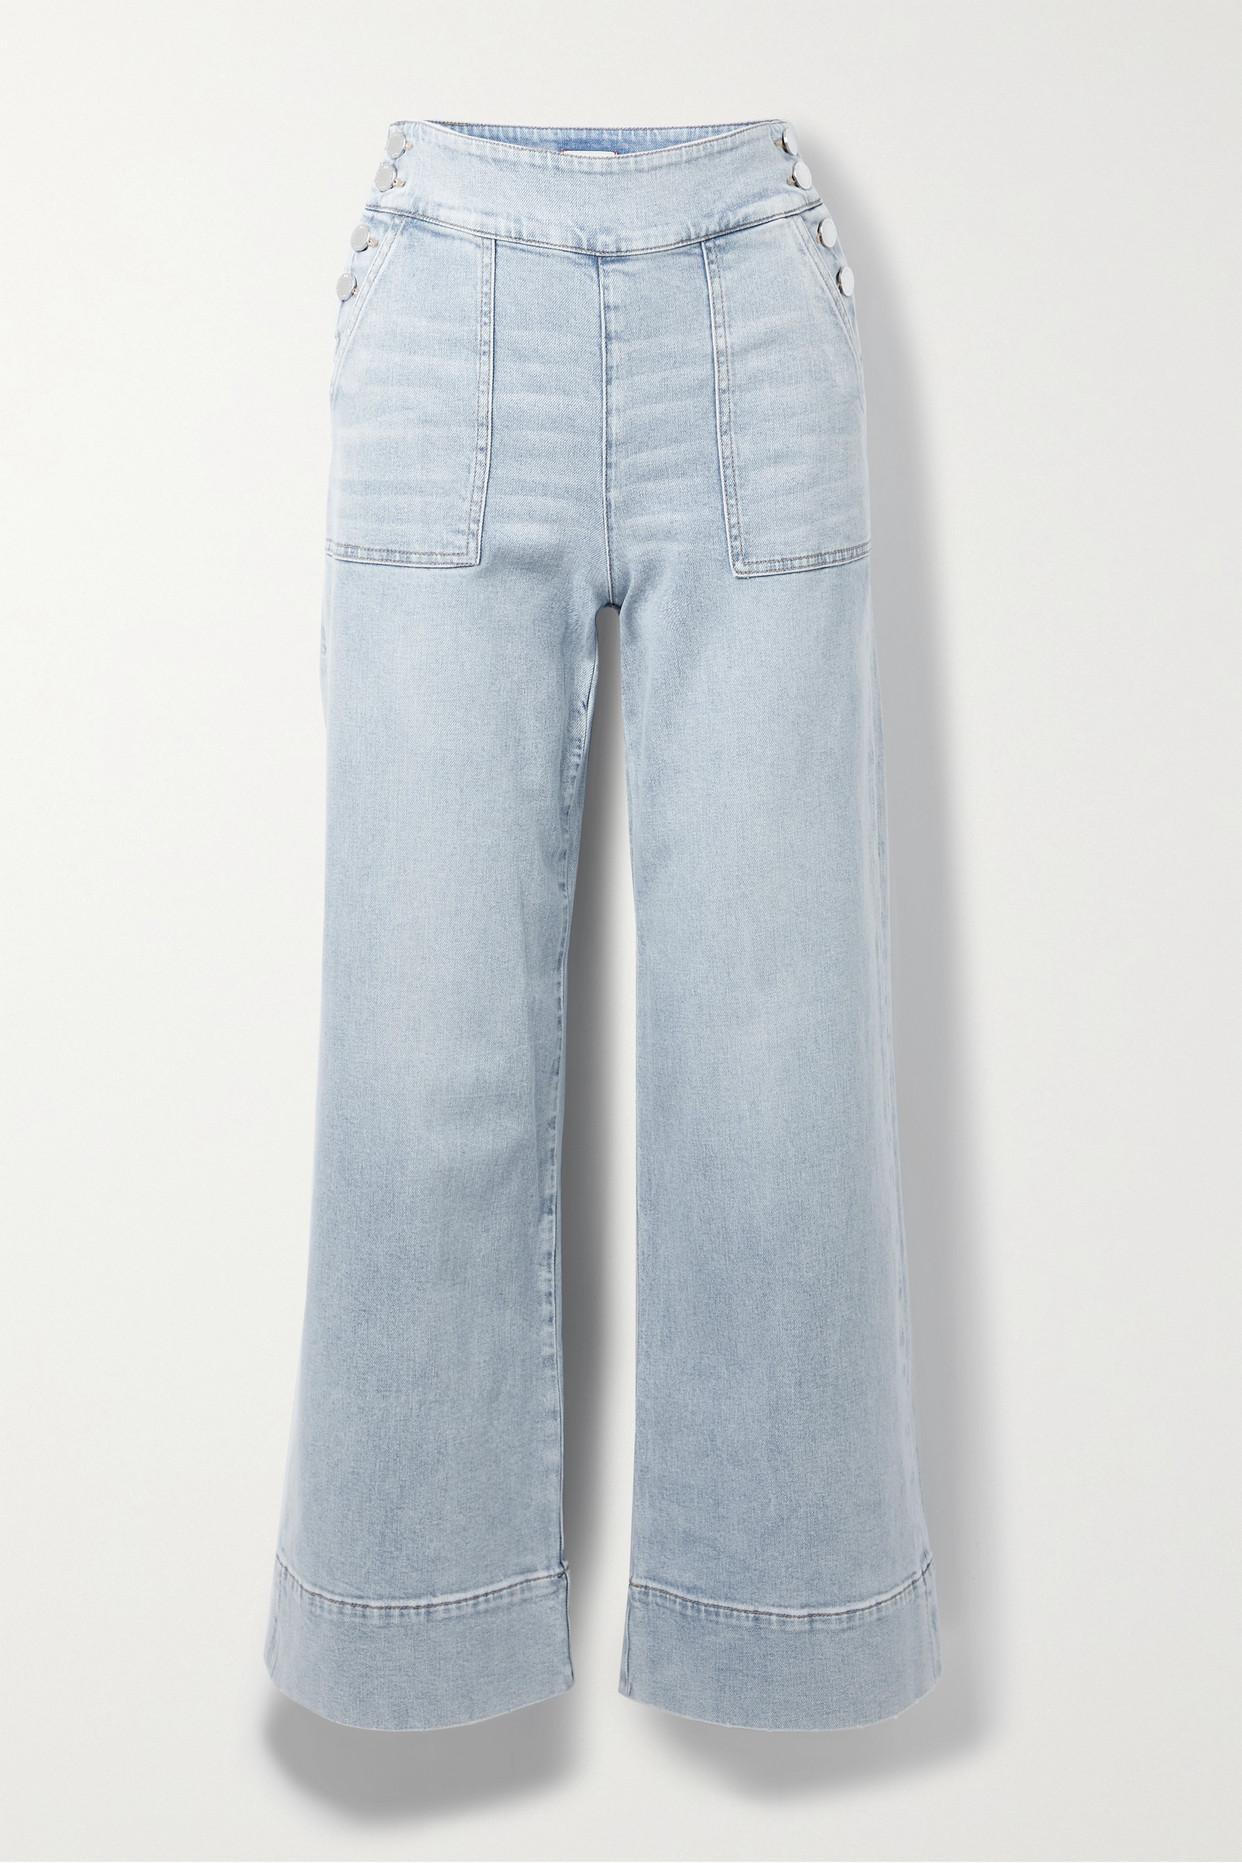 Alice + Olivia Donald High-rise Wide-leg Jeans in Blue | Lyst